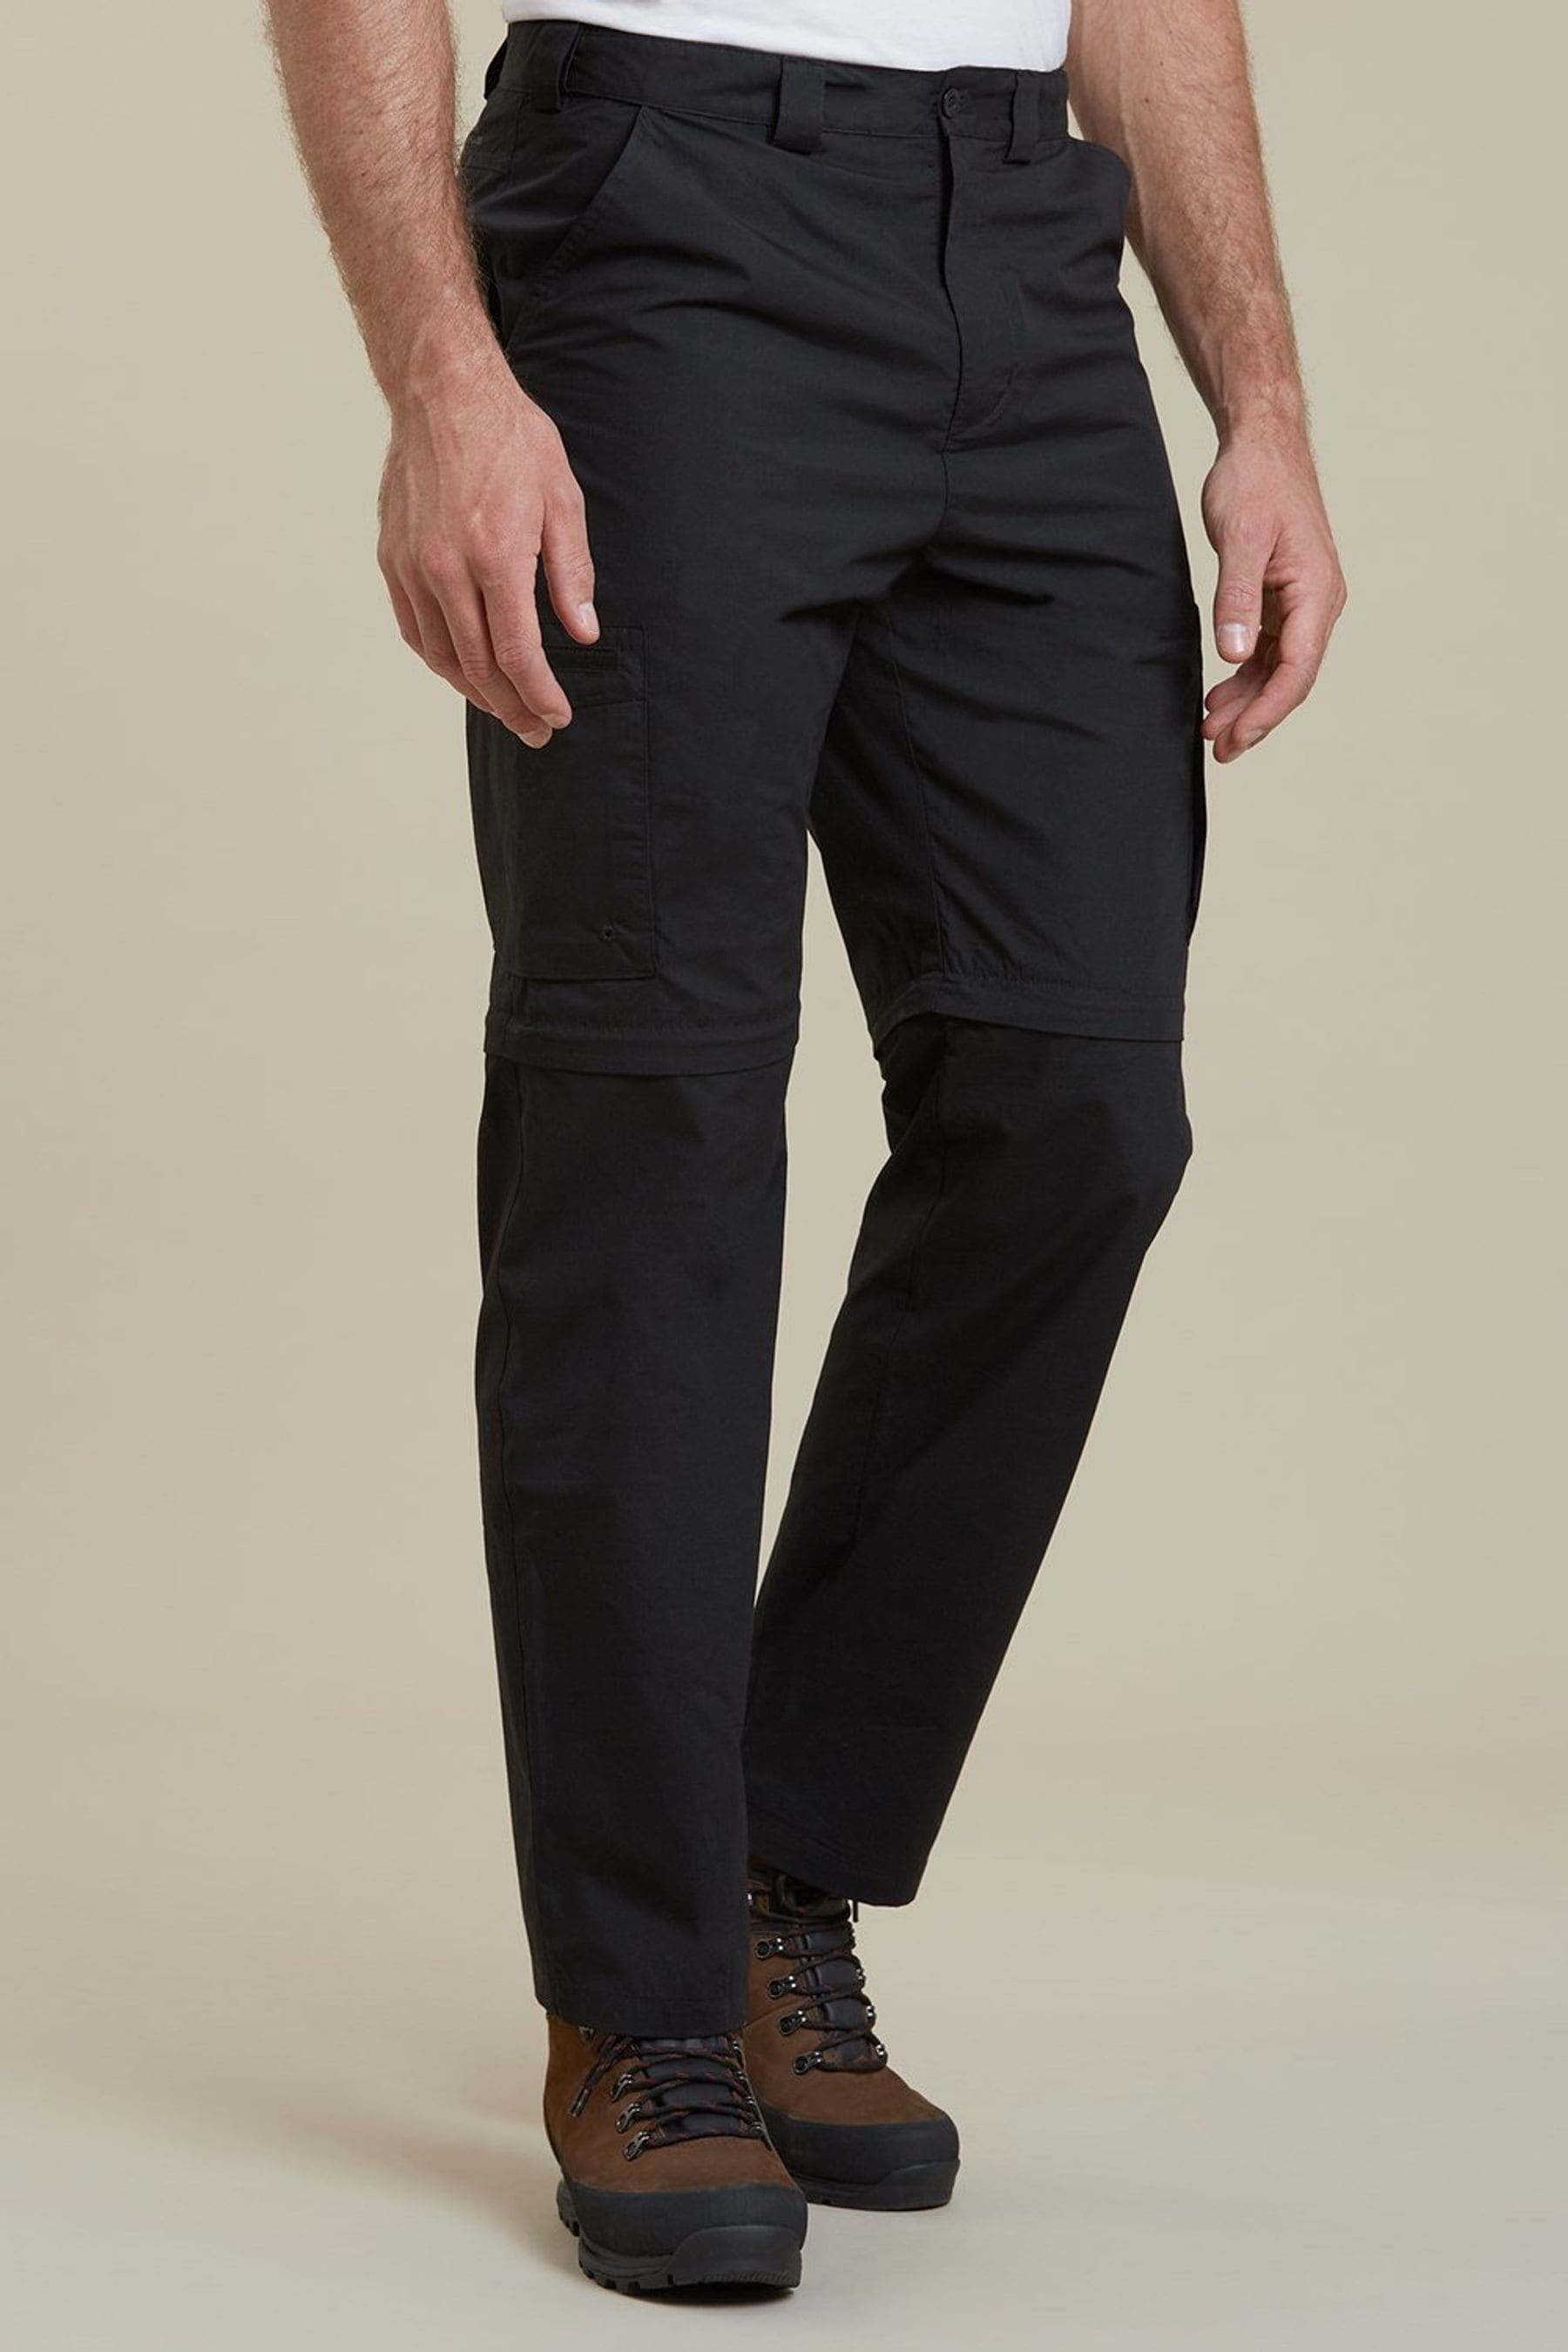 Buy Mountain Warehouse Black Convertible Walking Trousers from the Next ...